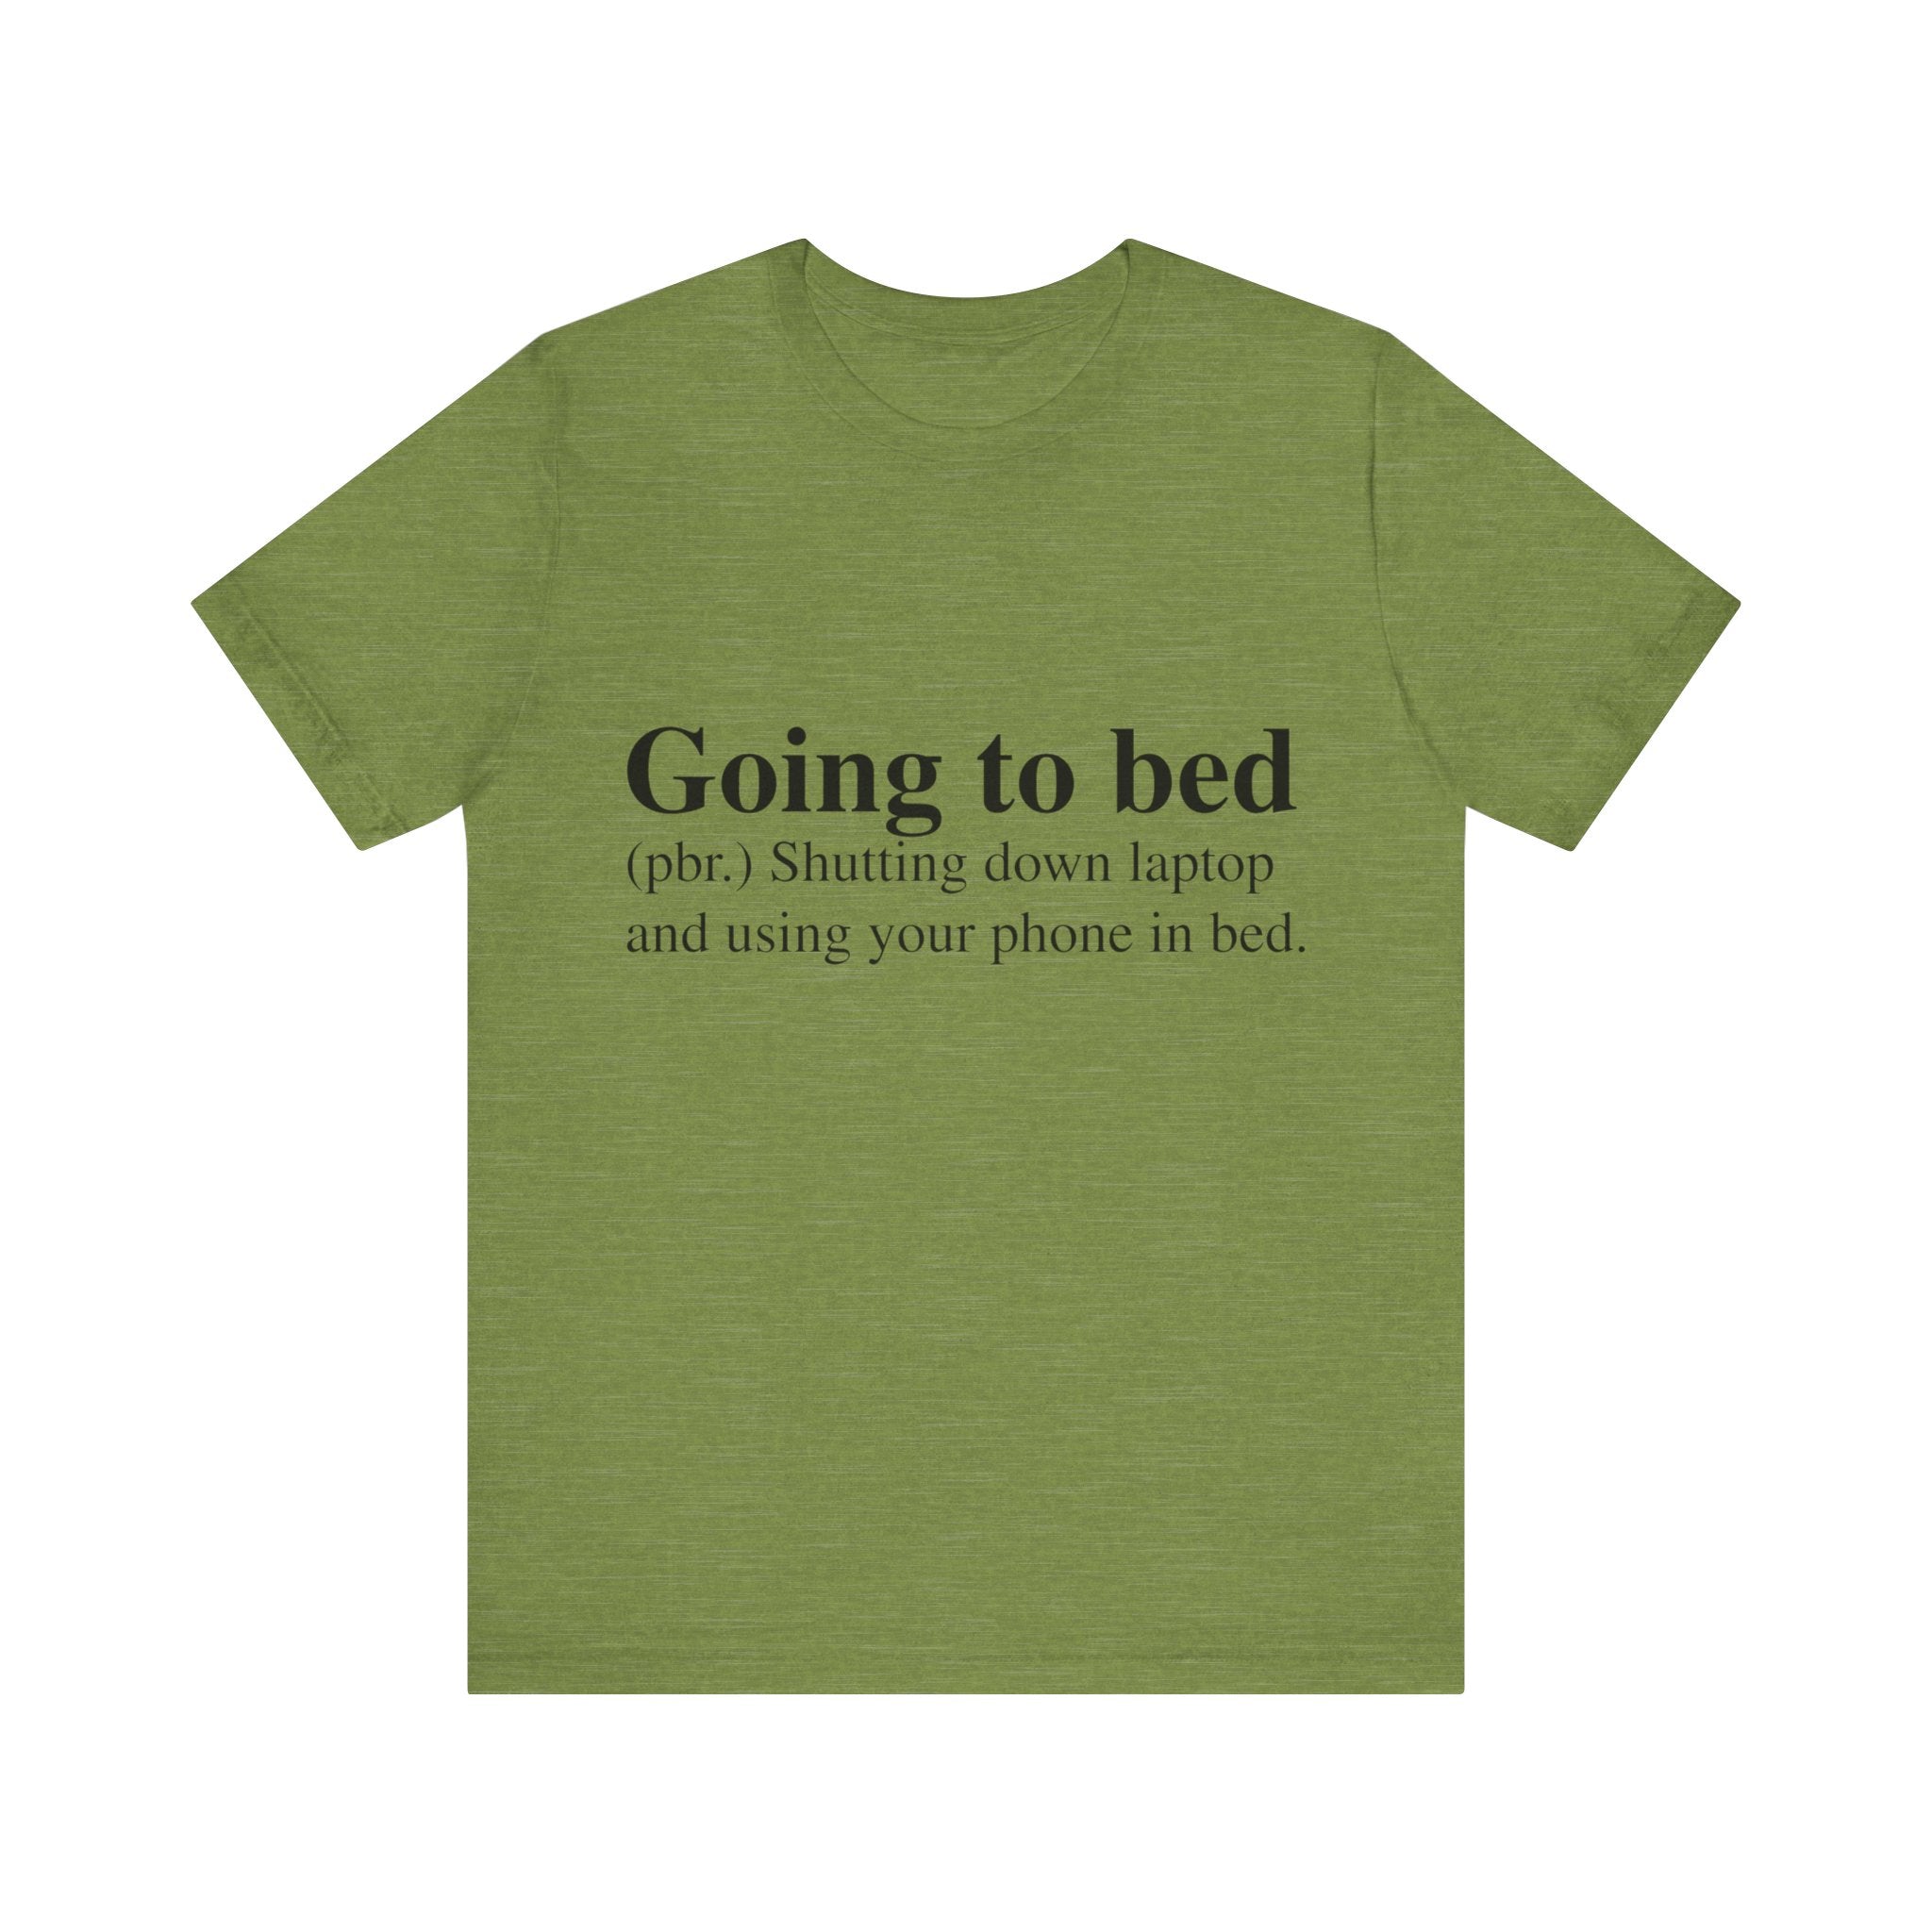 Green unisex jersey tee with text "Going to Bed" printed in black on the front.